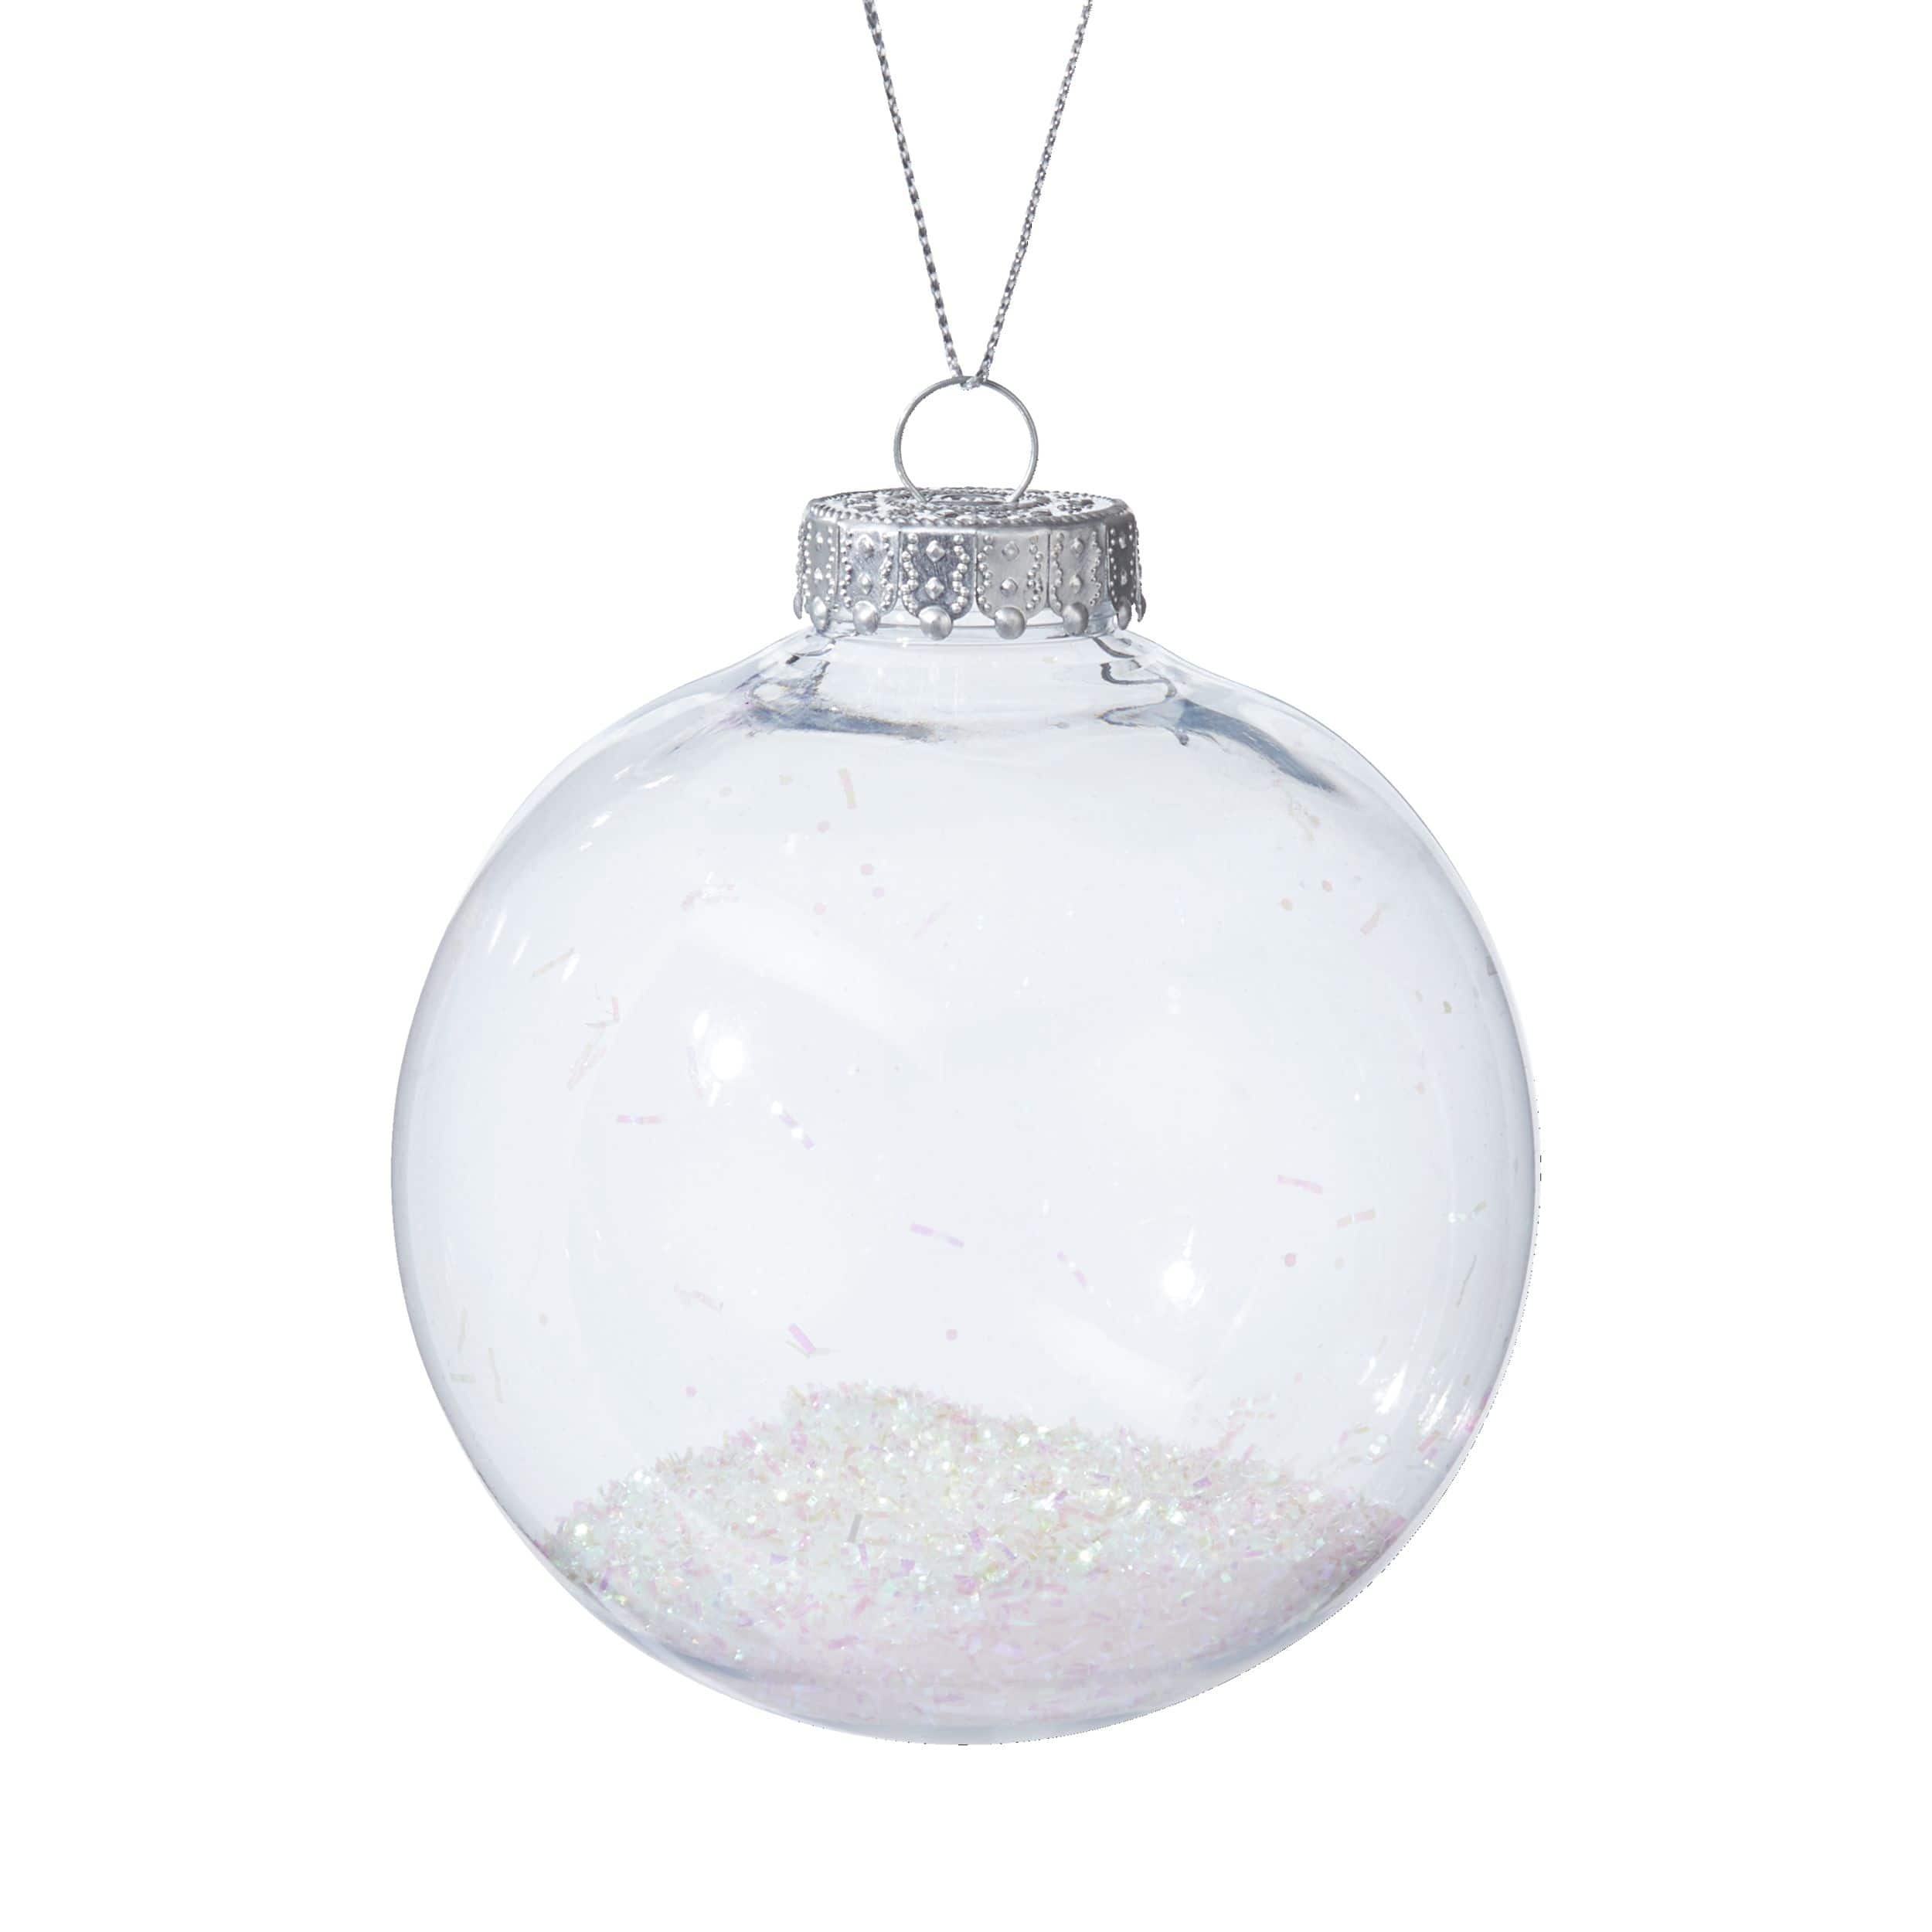 Great Choice Products 20 Pcs 100Mm Ornament Balls Christmas Decoration  Balls, Clear Plastic Fillable Ornaments Ball